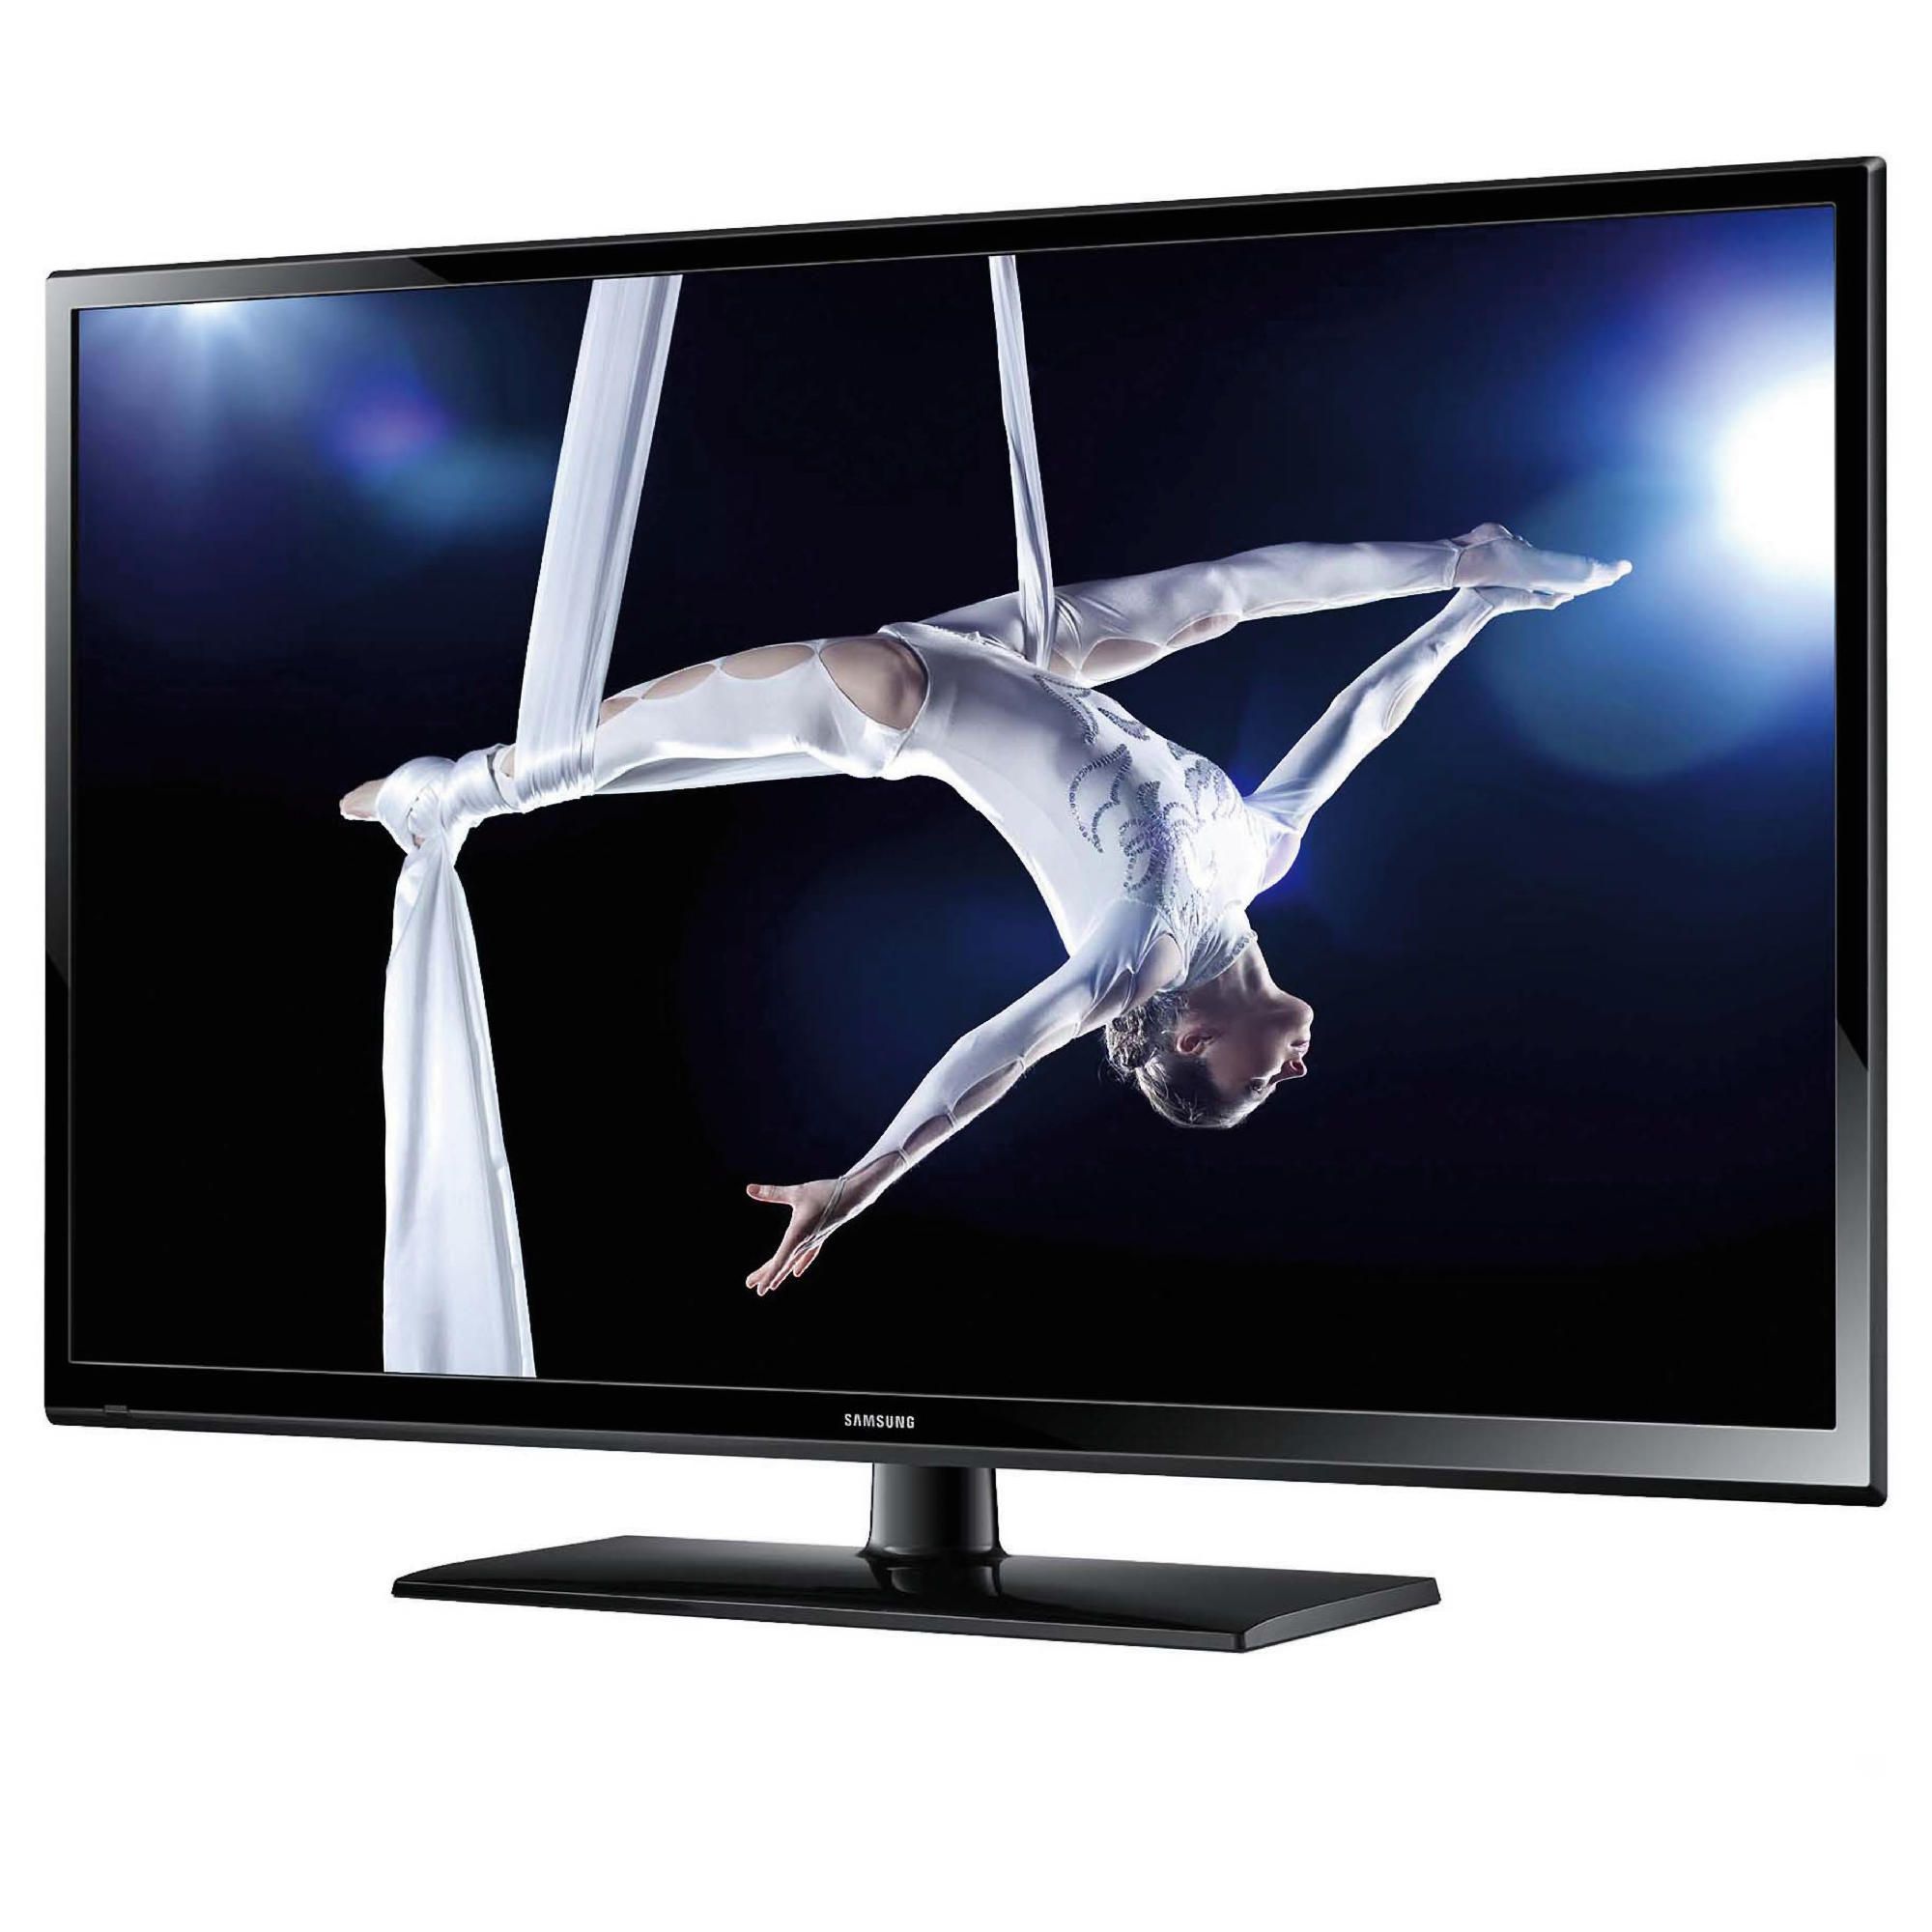 Samsung PS51F4500 51 inch HD Ready 720p Plasma TV with Freeview